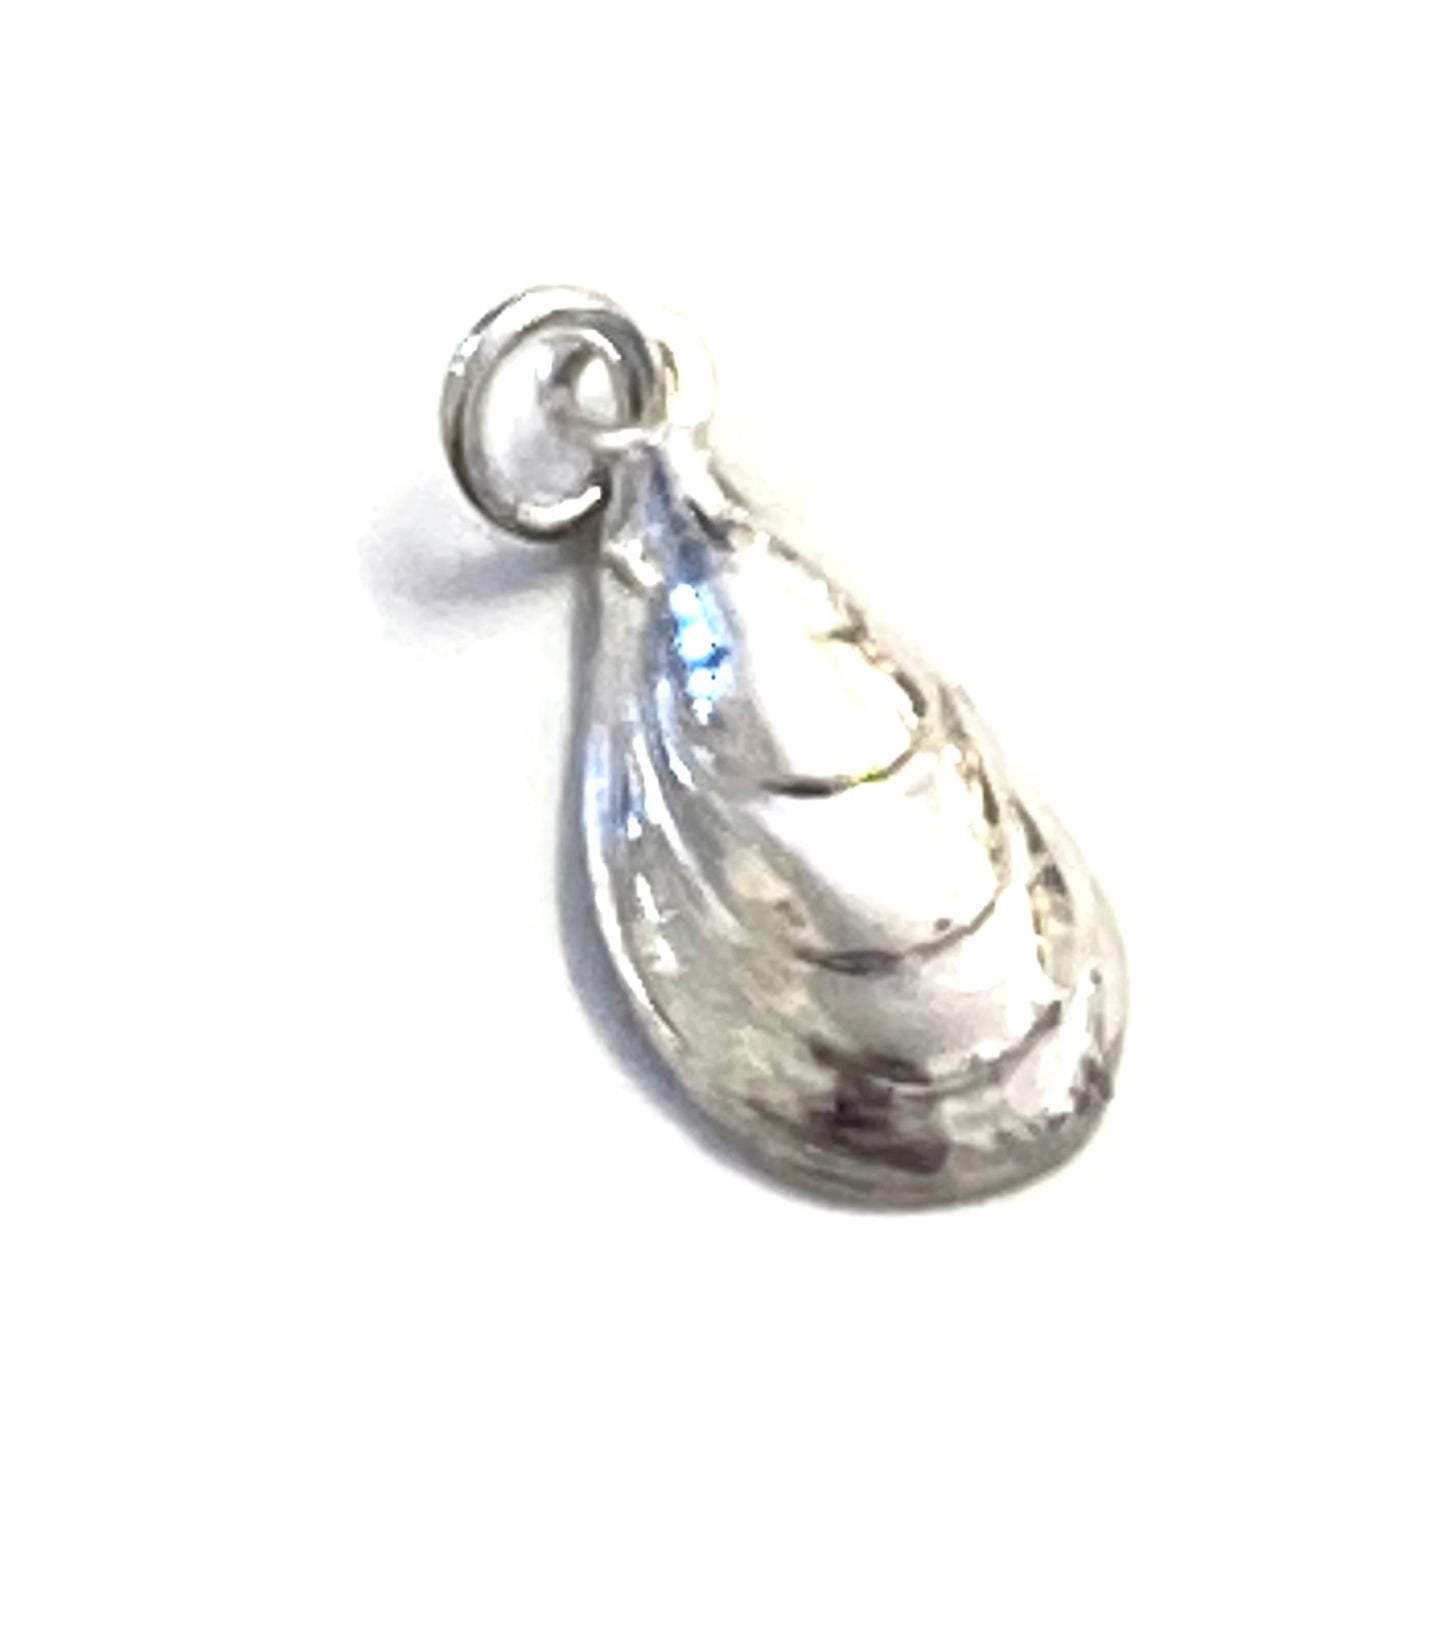 mussel shell charm back view